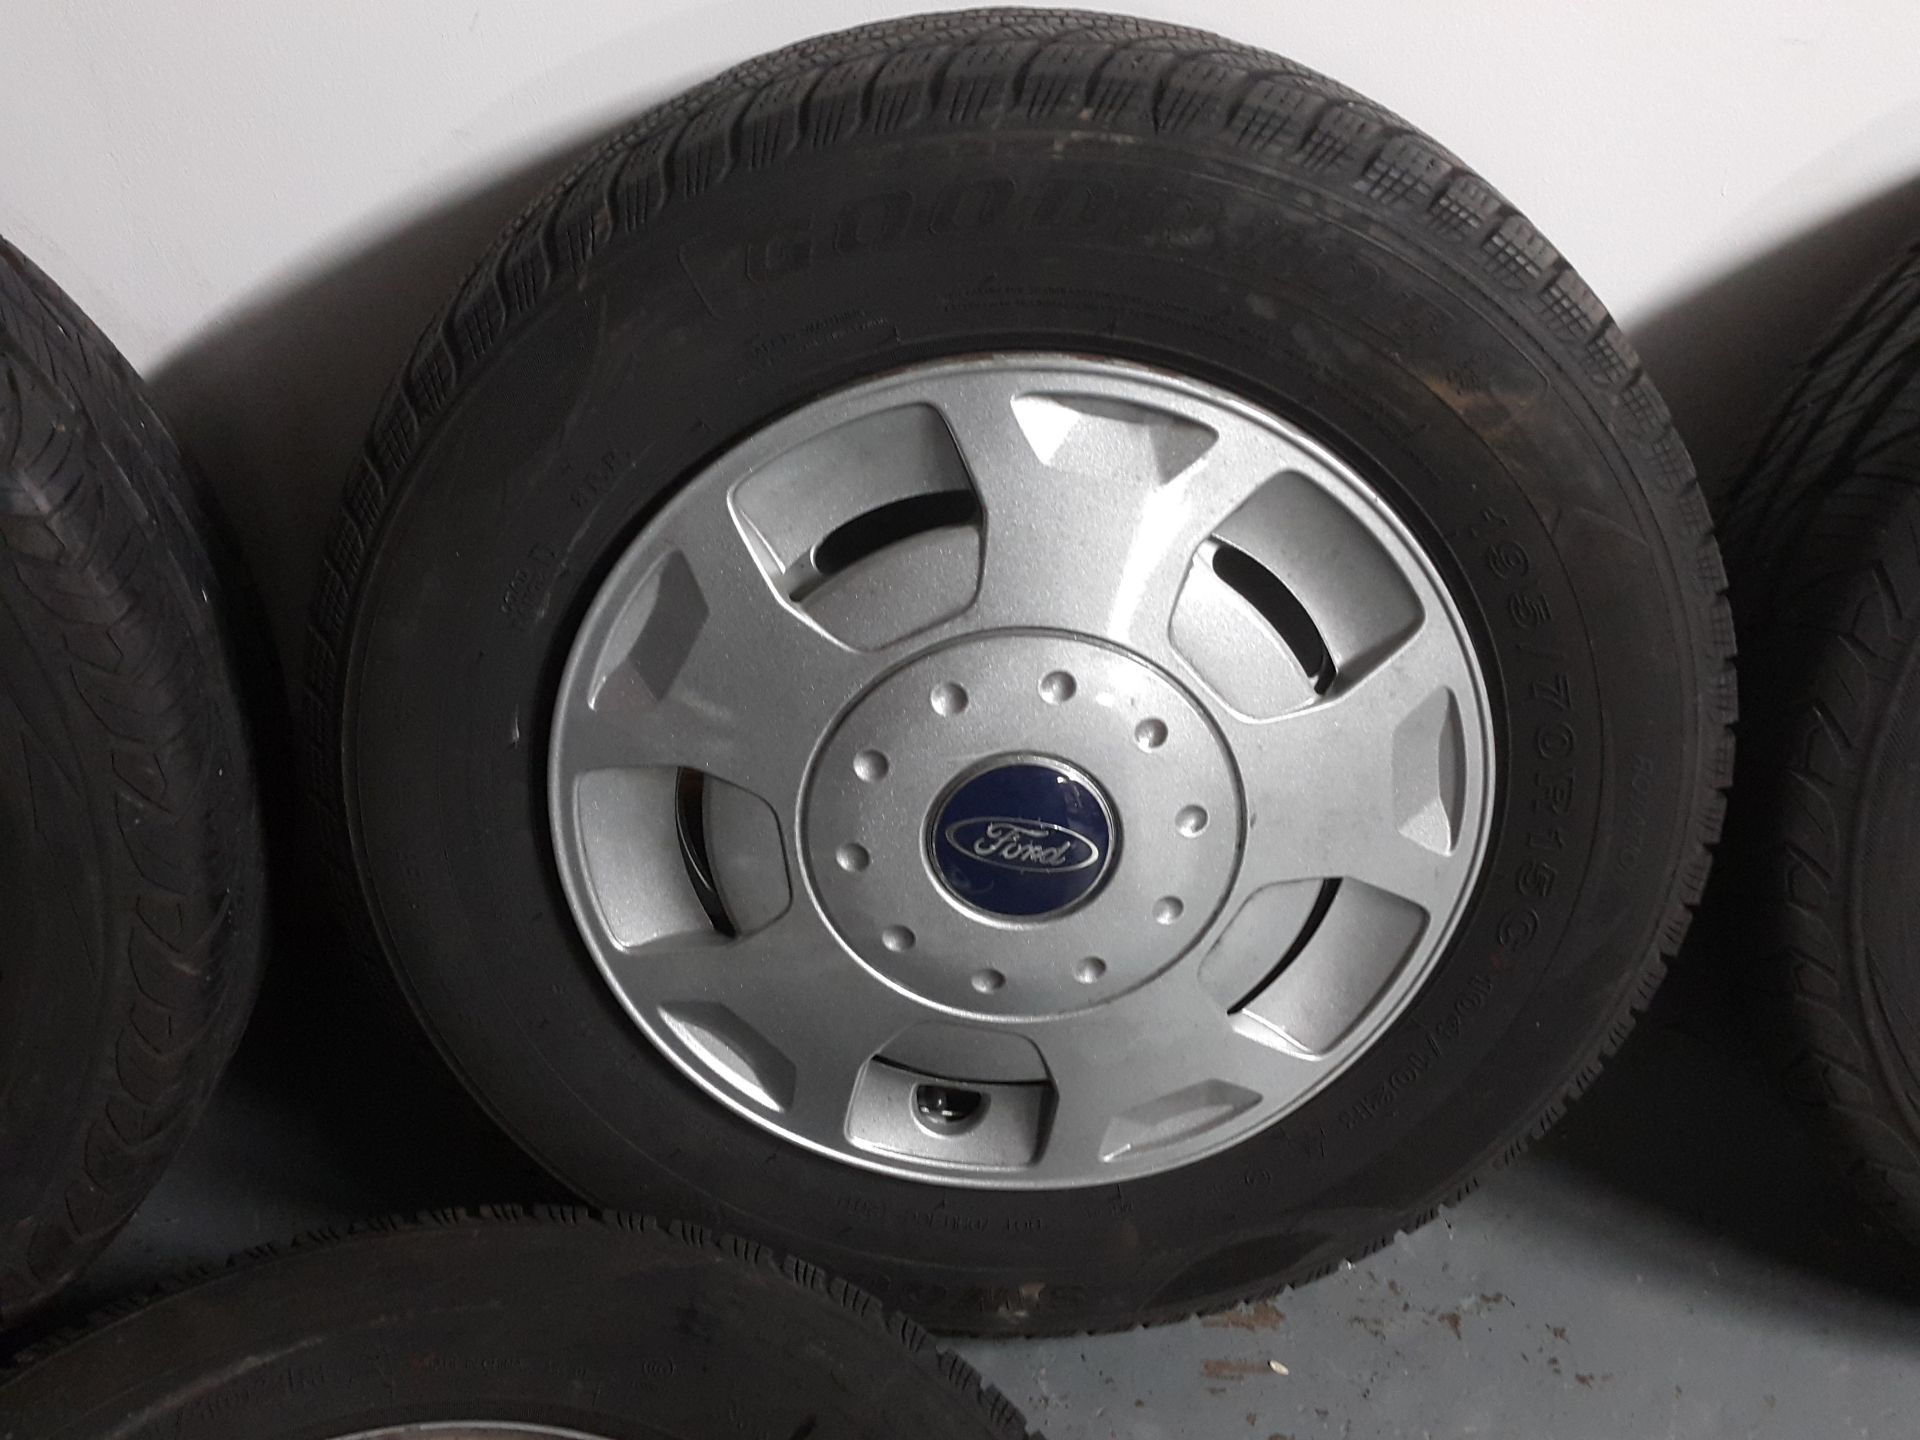 4 X FORD TRANSIT 15" STEEL RIMS WITH TYRES 195/70/R15 (2 UNIROYAL 2 OTHERS) - Bild 4 aus 9